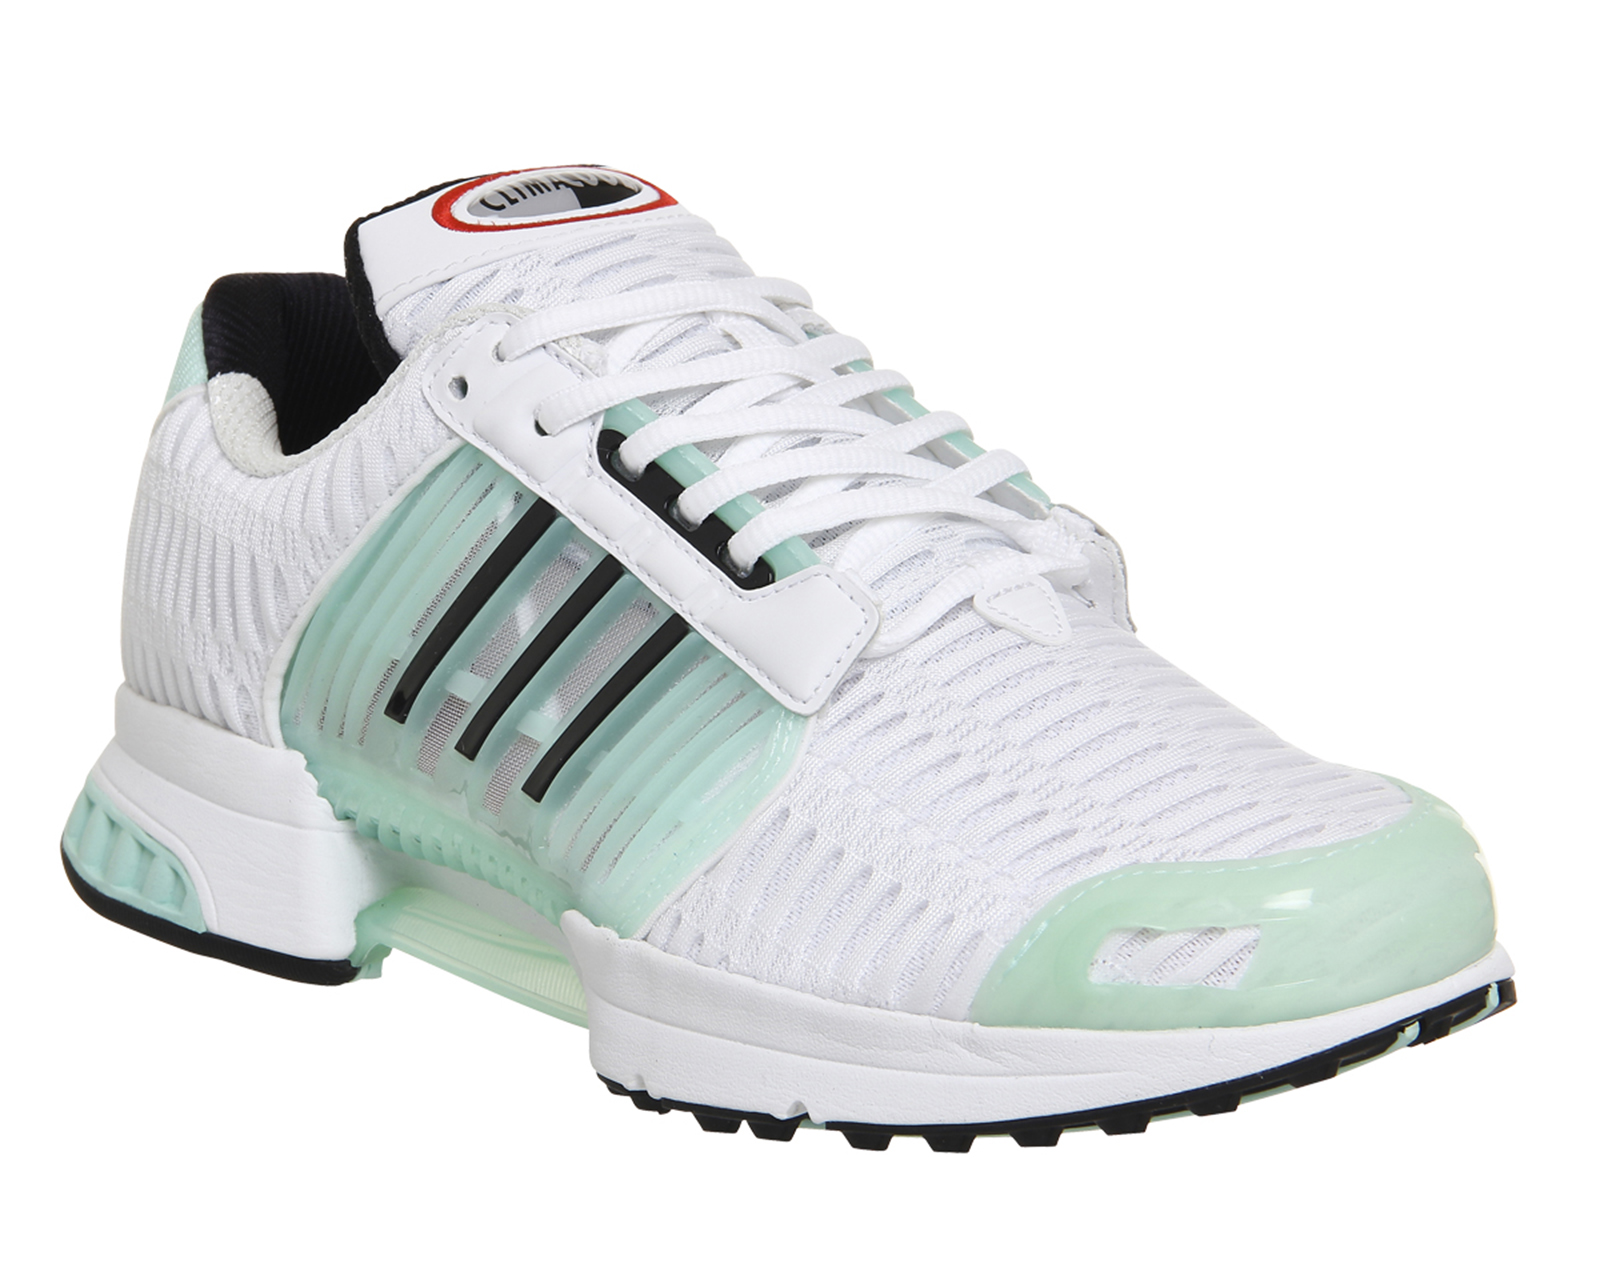 adidas Climacool 1 White Ice Green - His trainers